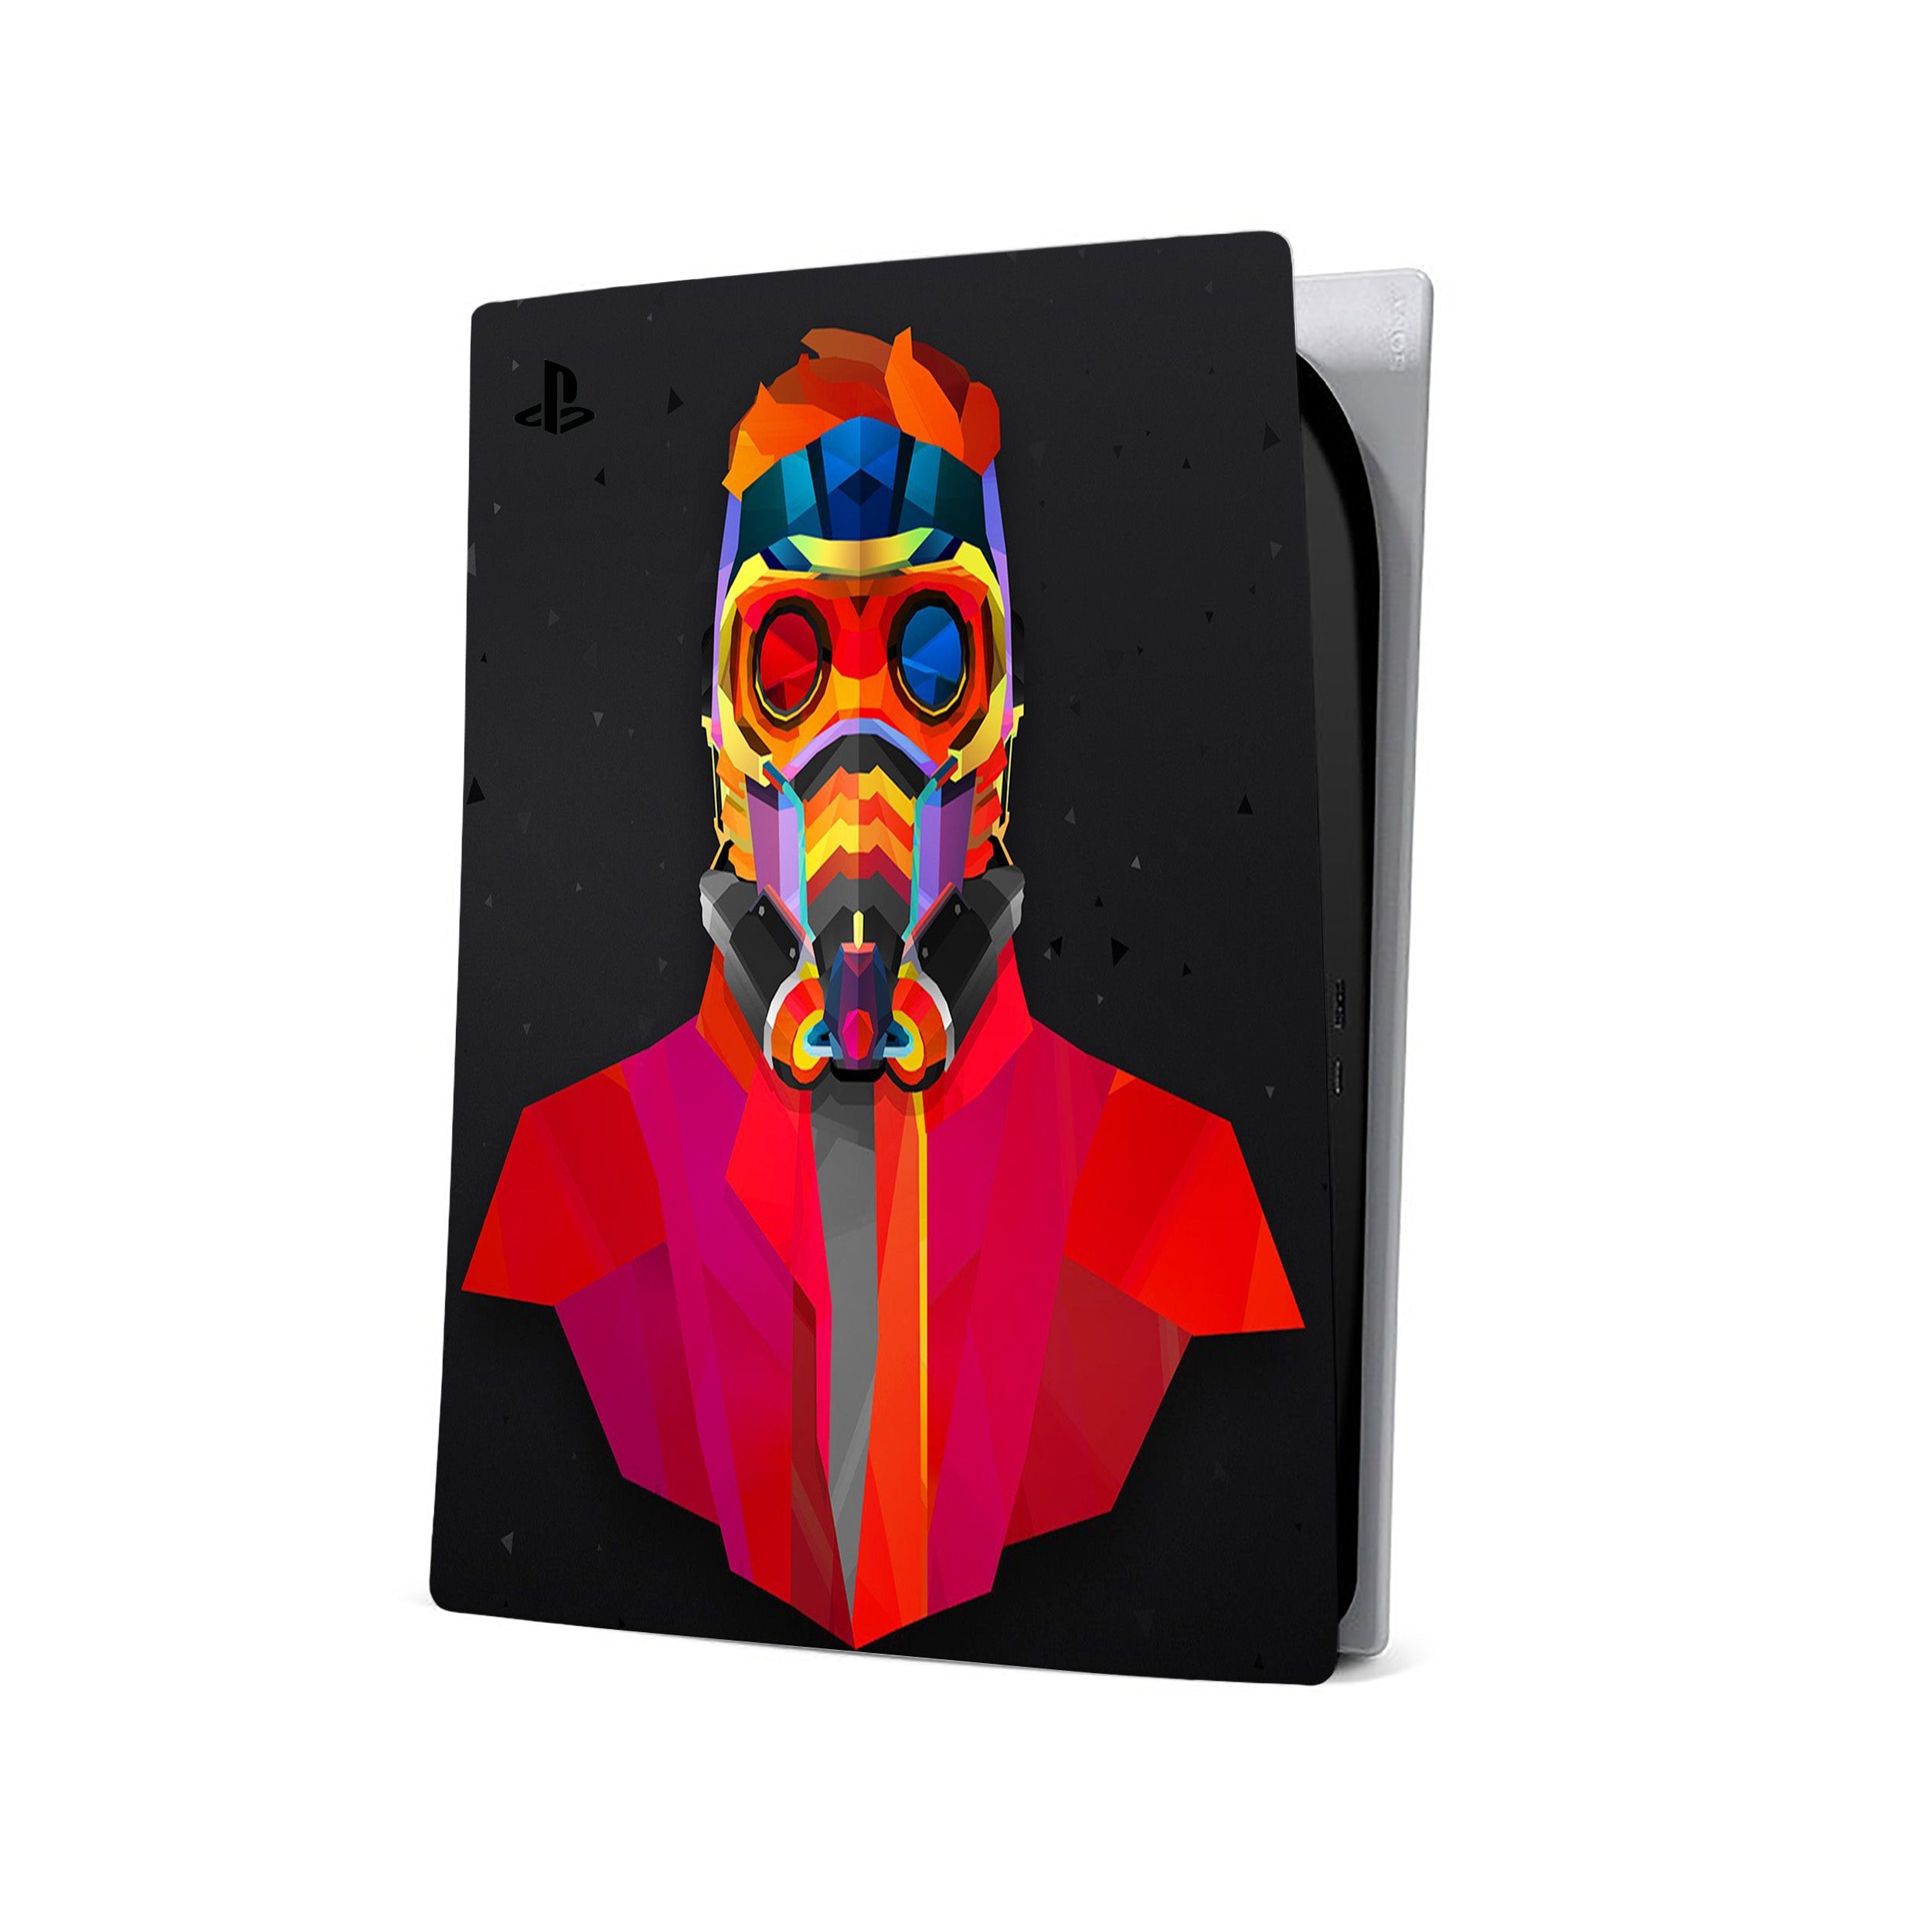 A video game skin featuring a Marvel Guardians of the Galaxy Star Lord design for the PS5.